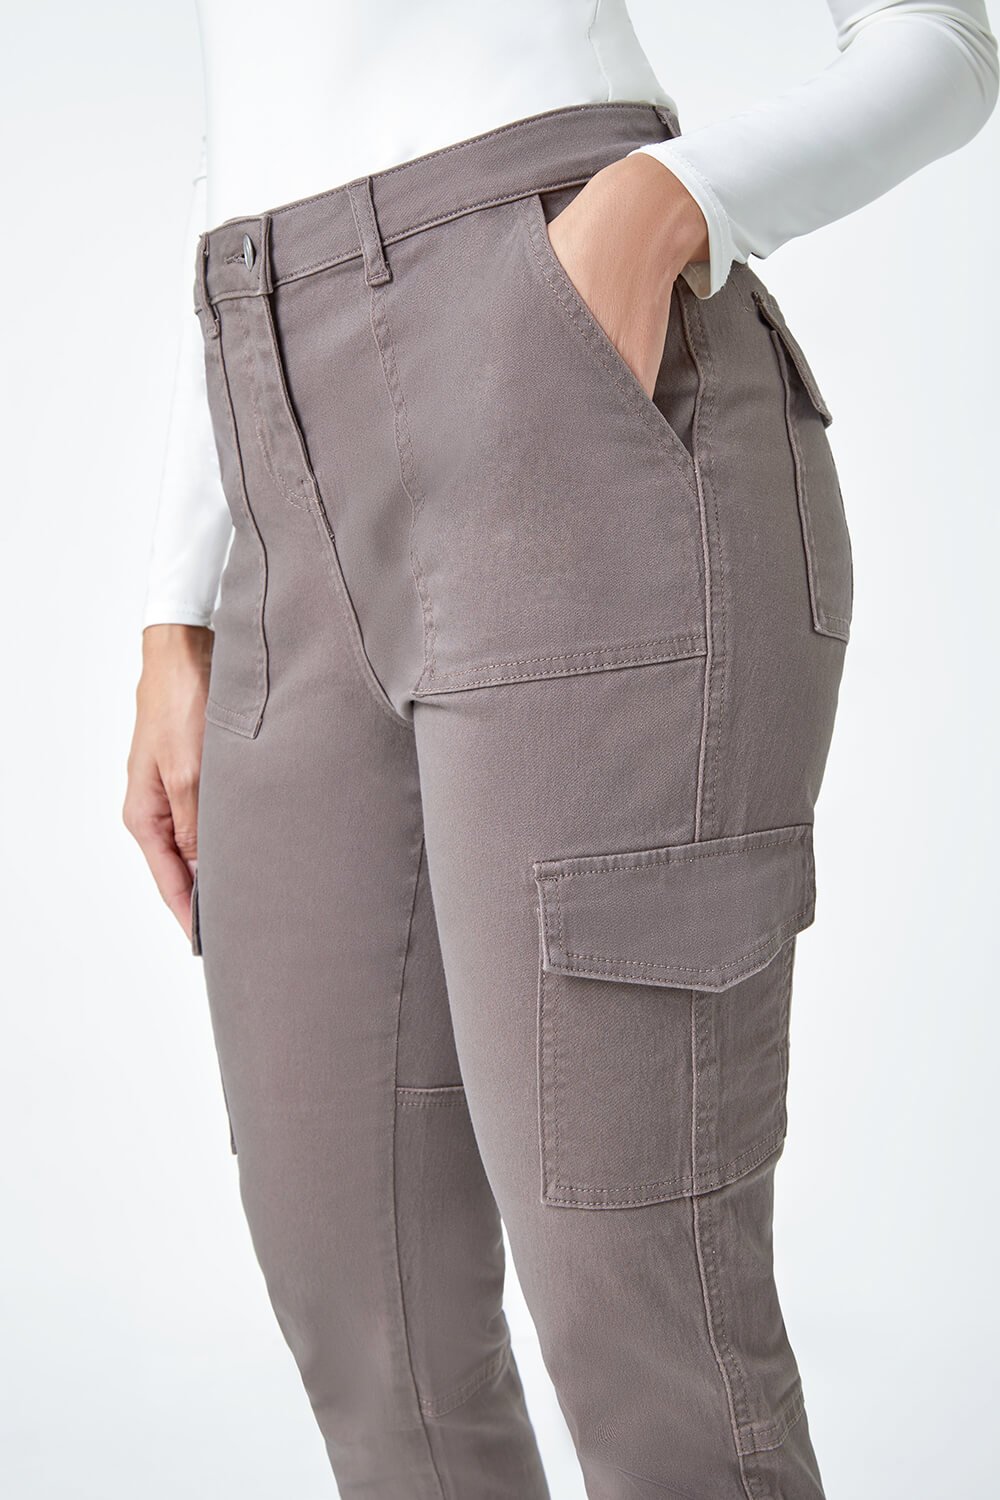 Taupe Cotton Blend Cargo Stretch Jegging, Image 5 of 5